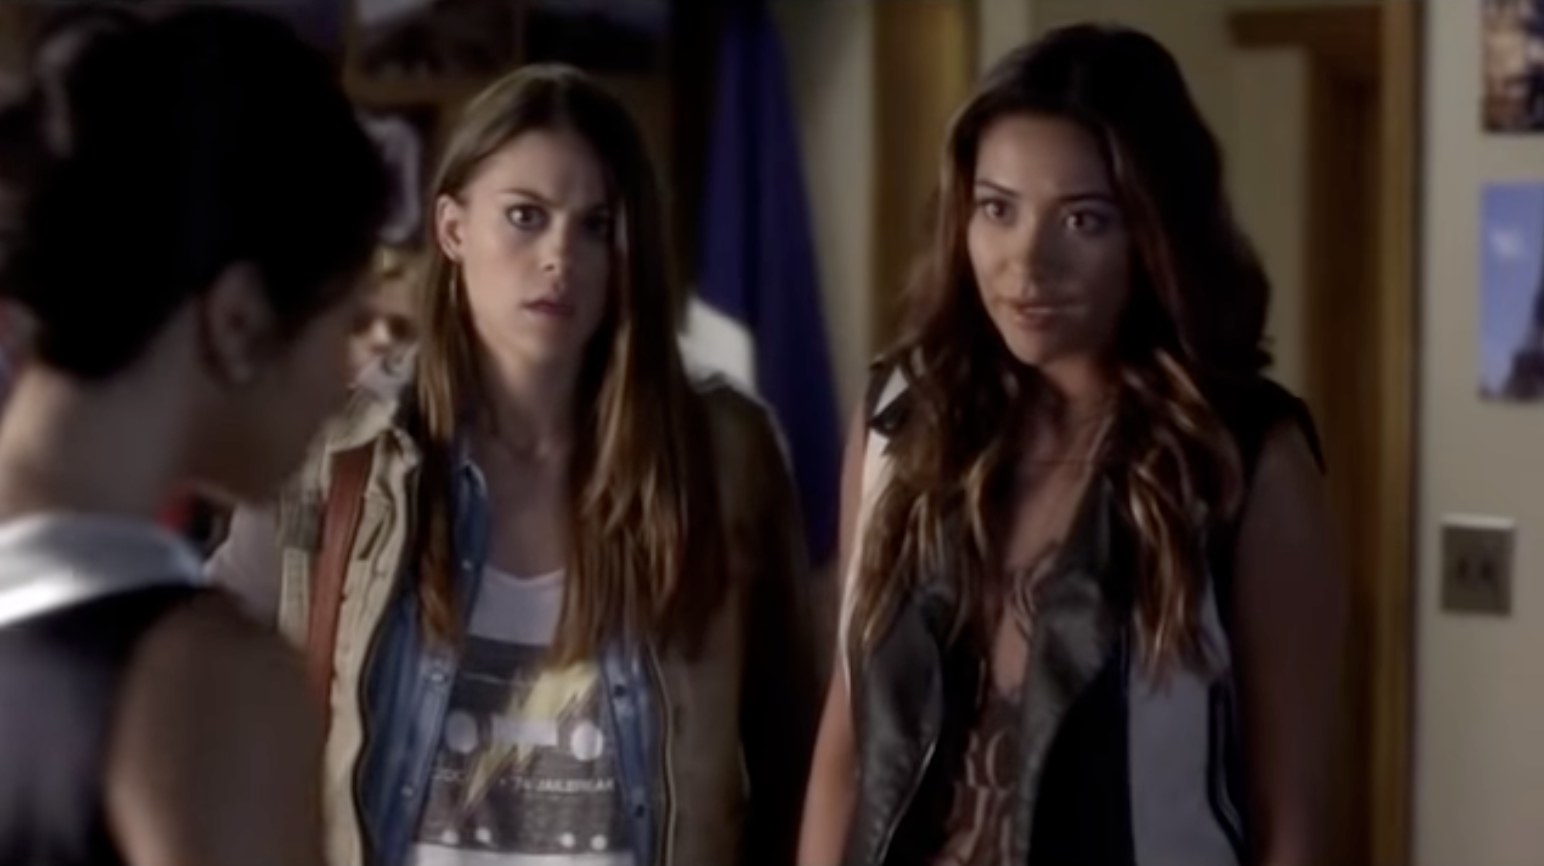 paige and emily in pretty little liars